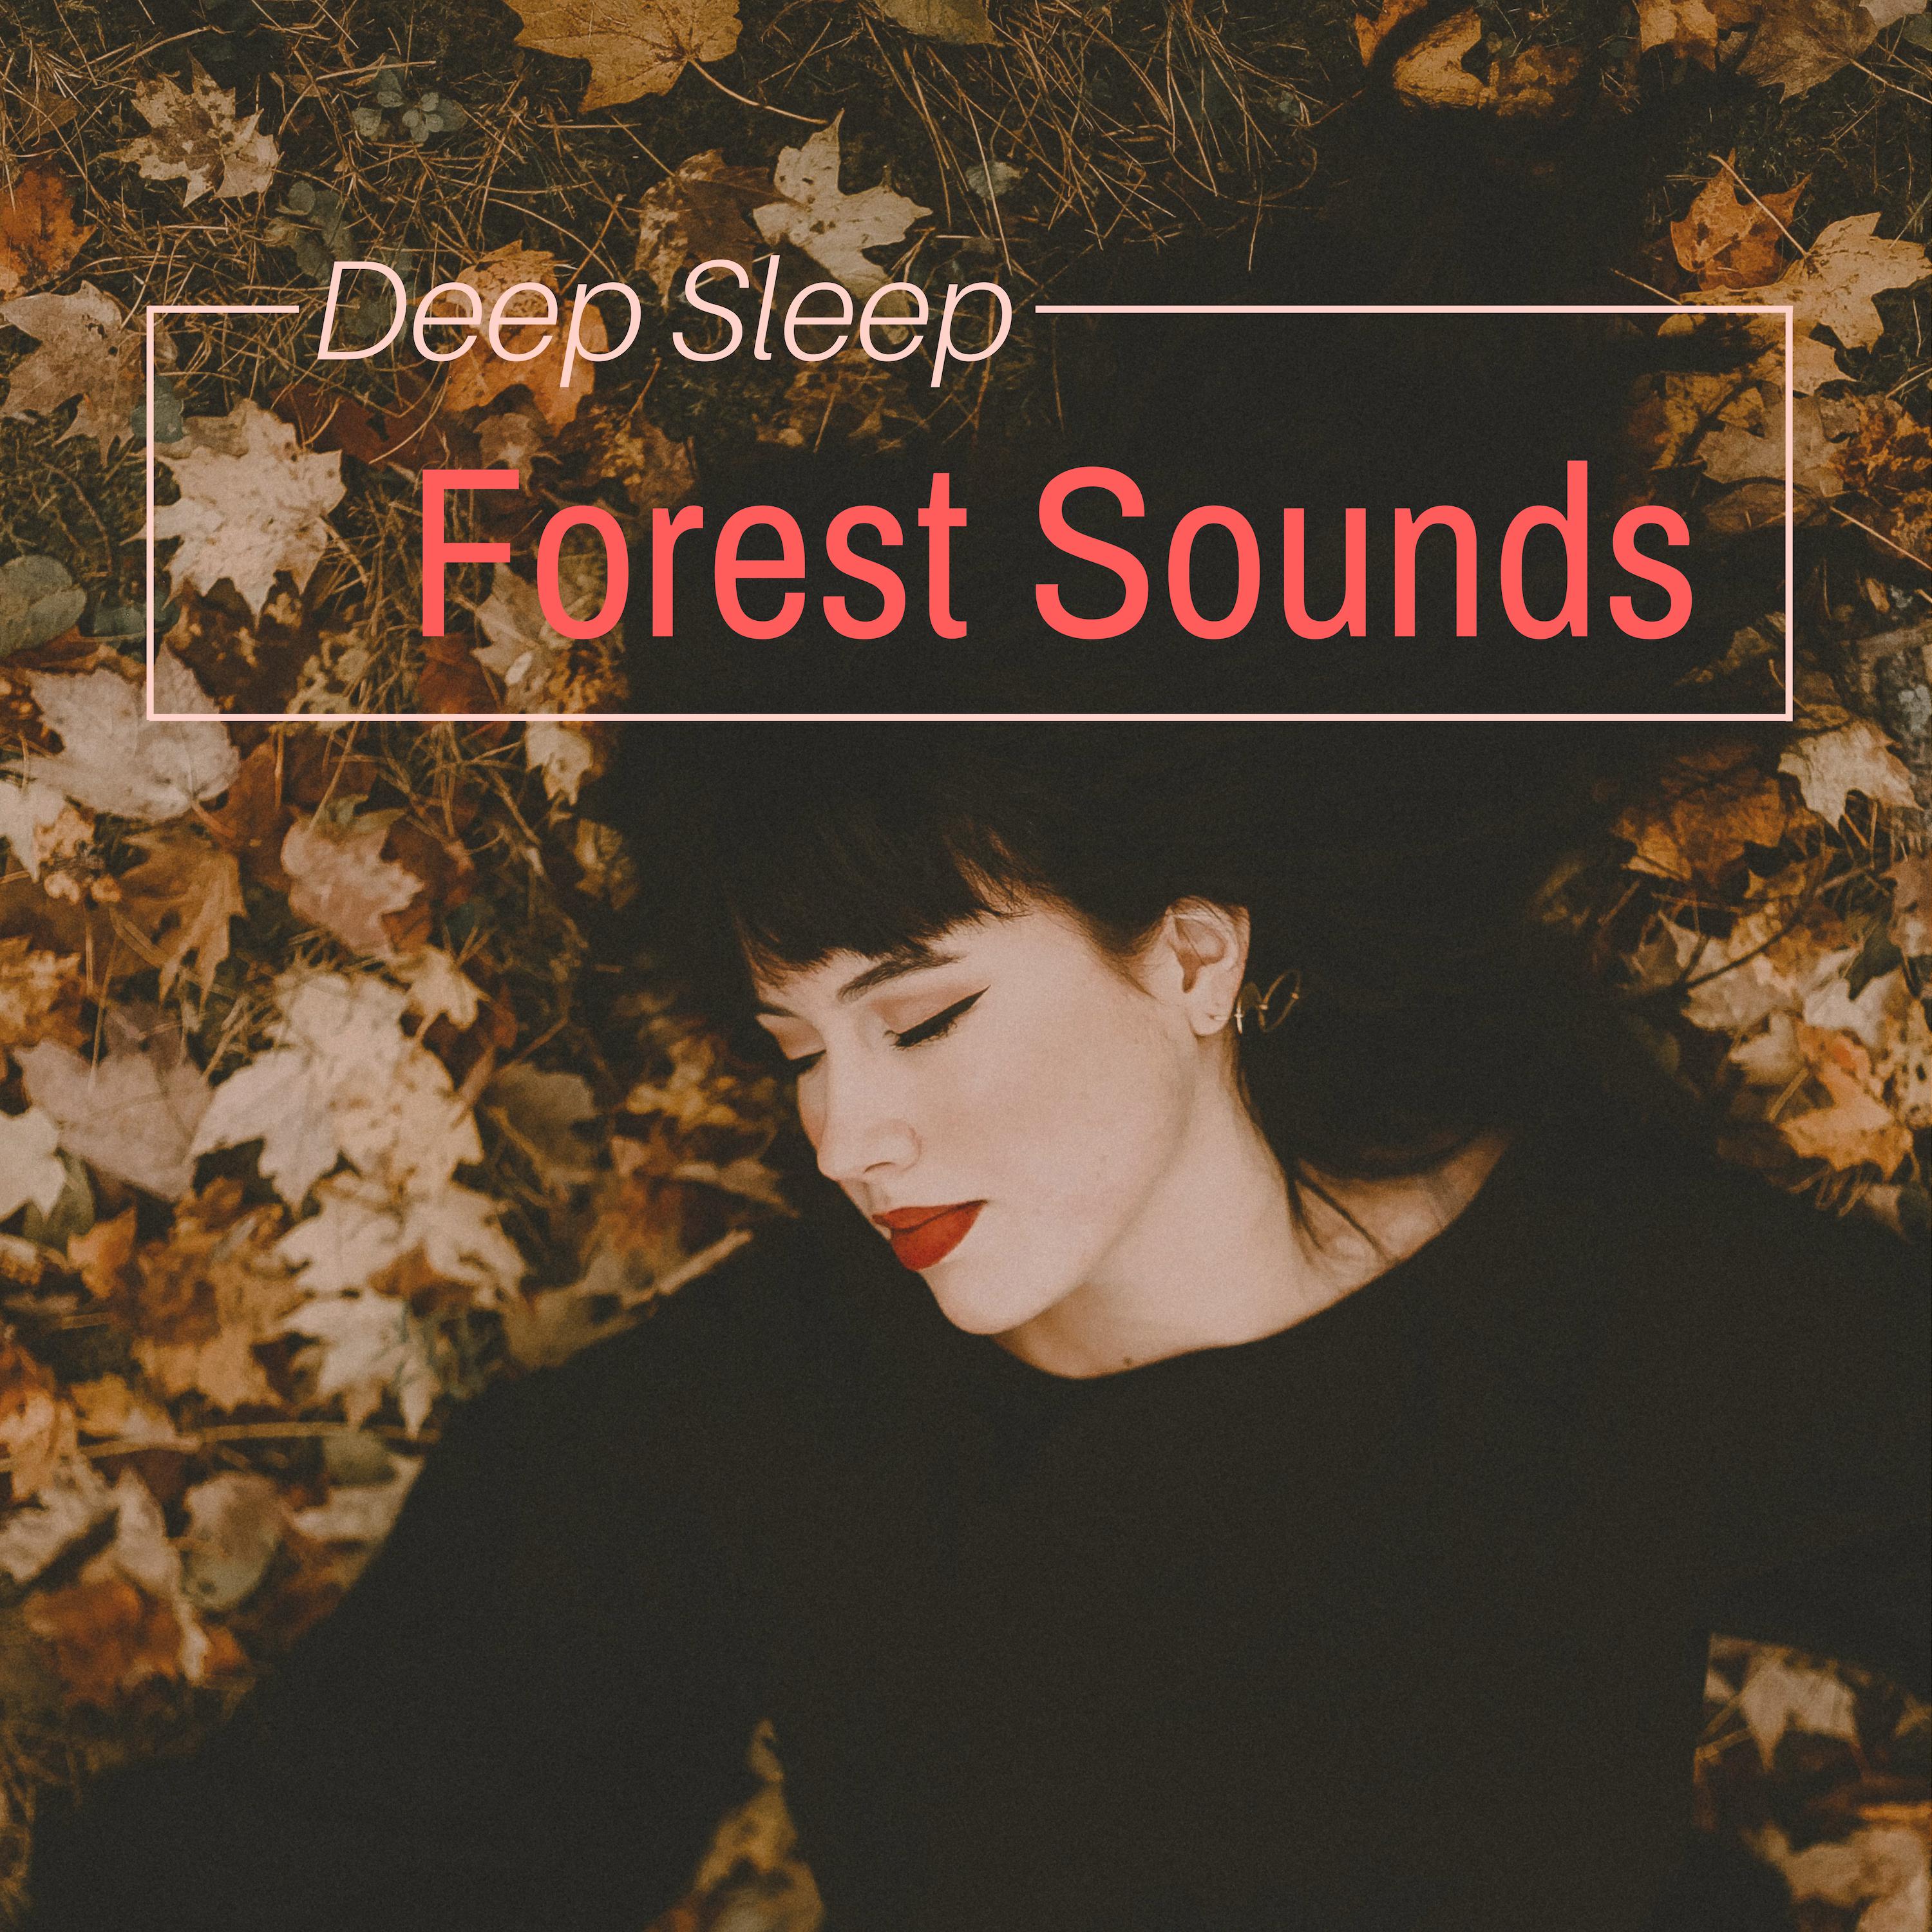 Deep Sleep Forest Sounds - Dreamy Night Music for Relaxation